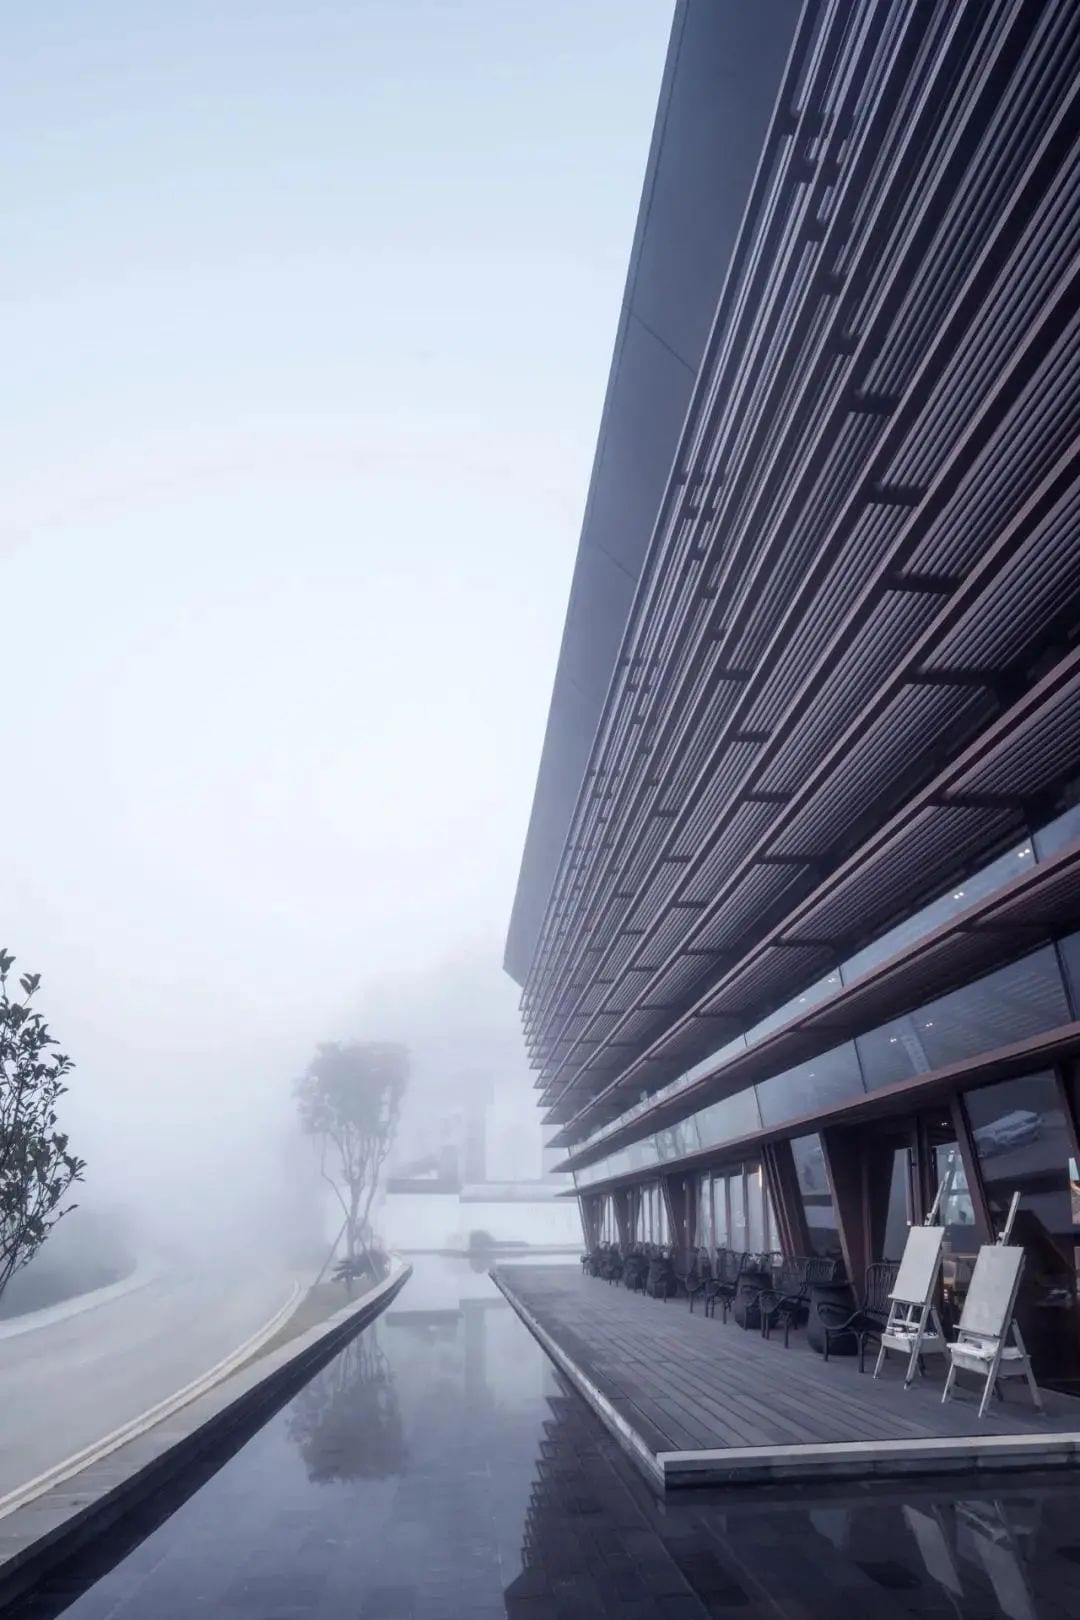 At This Year's Architectural Oscars, I Saw The Rise Of The Chinese Aesthetic - Blog - 46